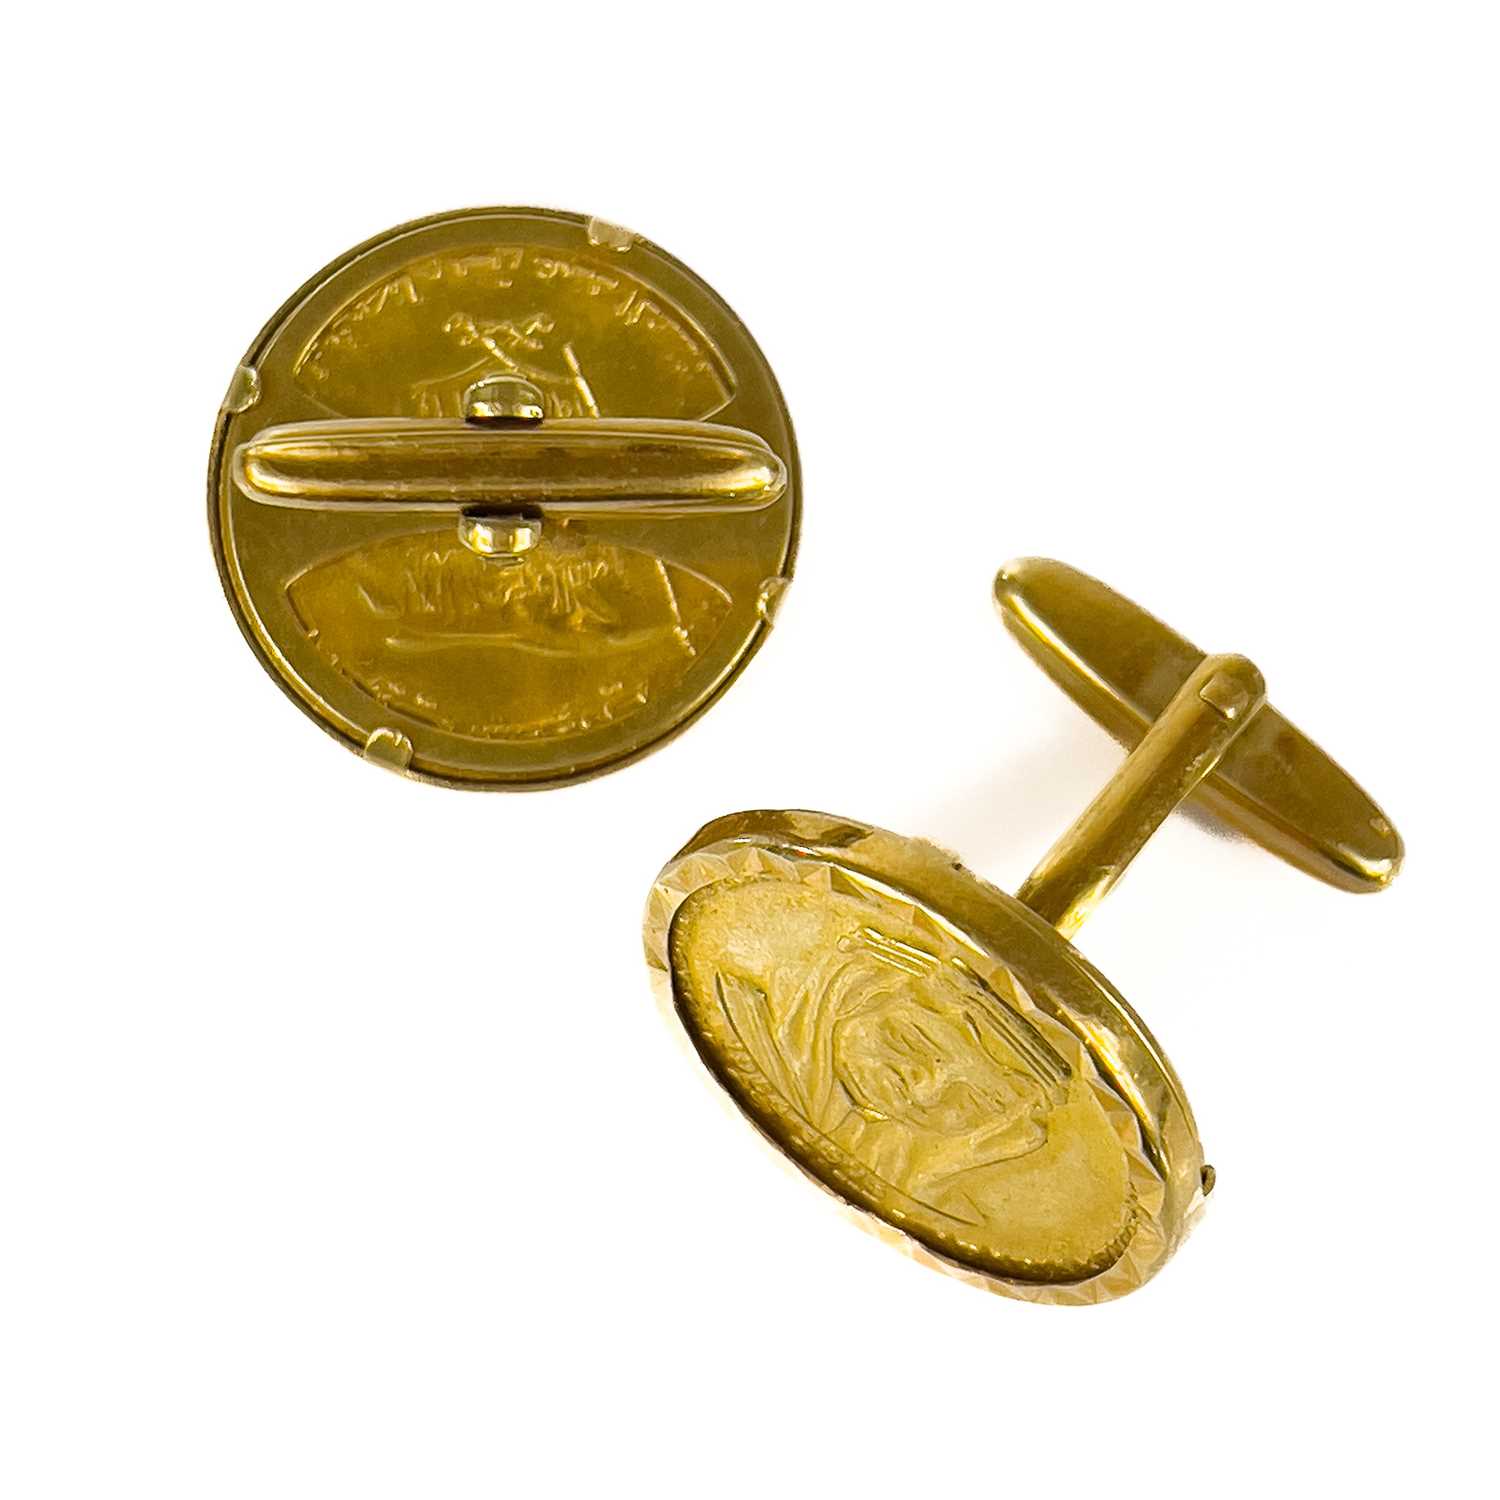 A pair of 22ct gold Saudi Arabia King Faisal commemorative medals set into 18ct cuff links. - Image 4 of 7